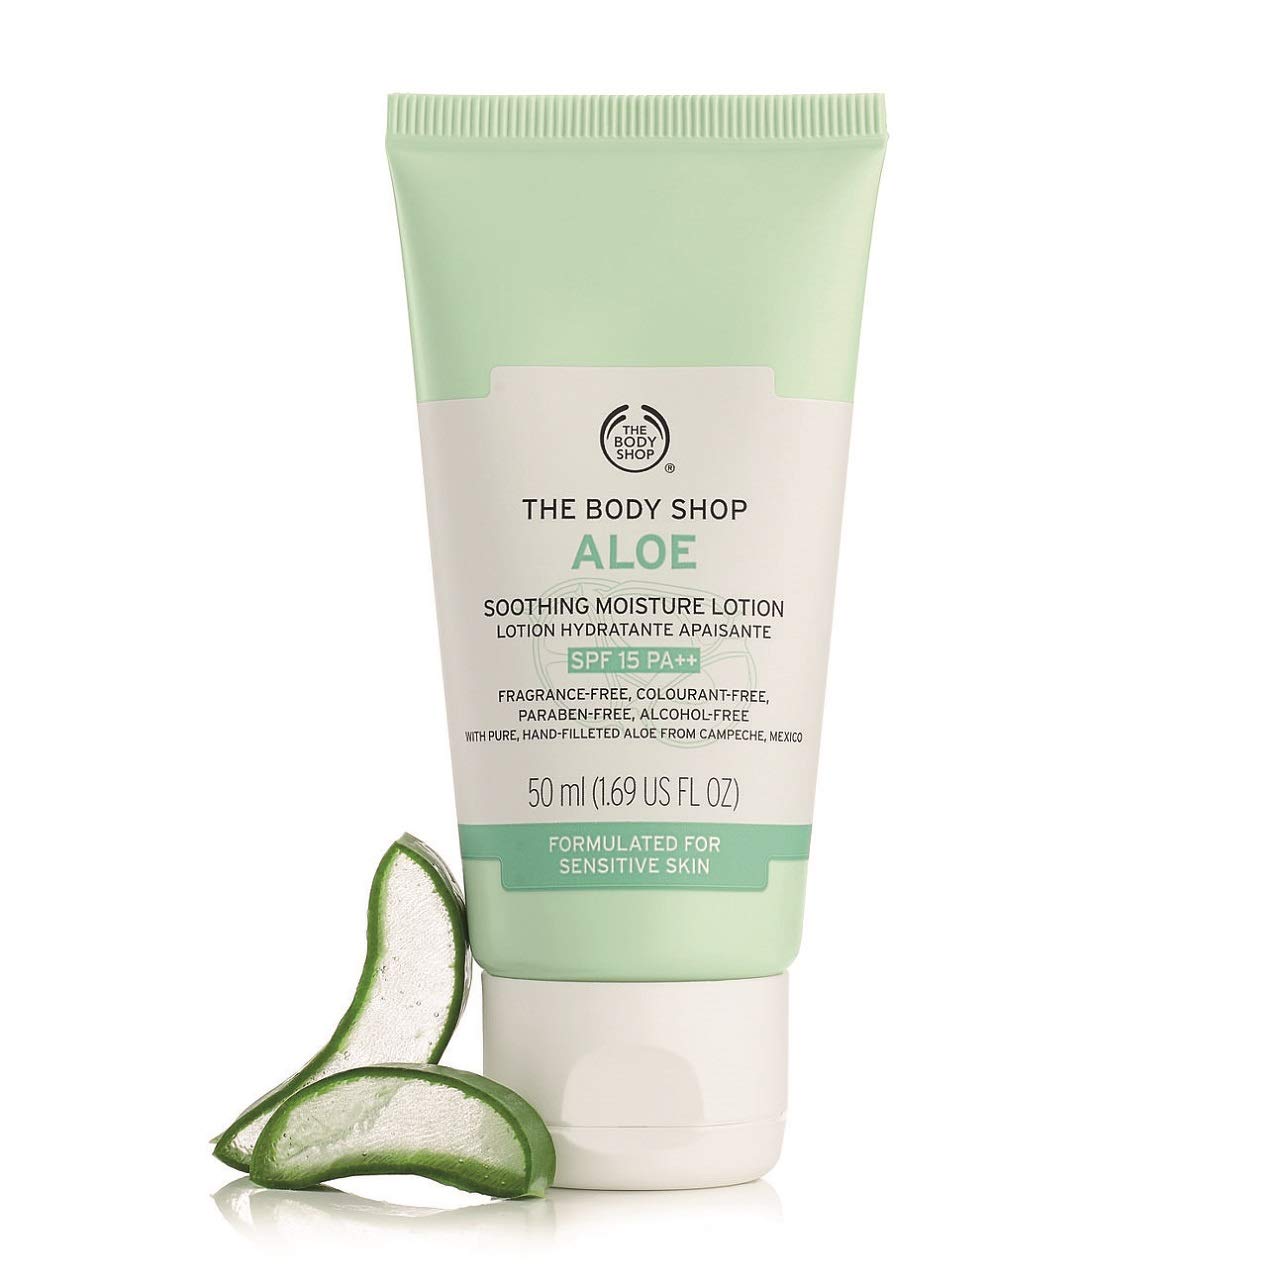 The Body Shop Aloe Soothing Moisture Lotion SPF15